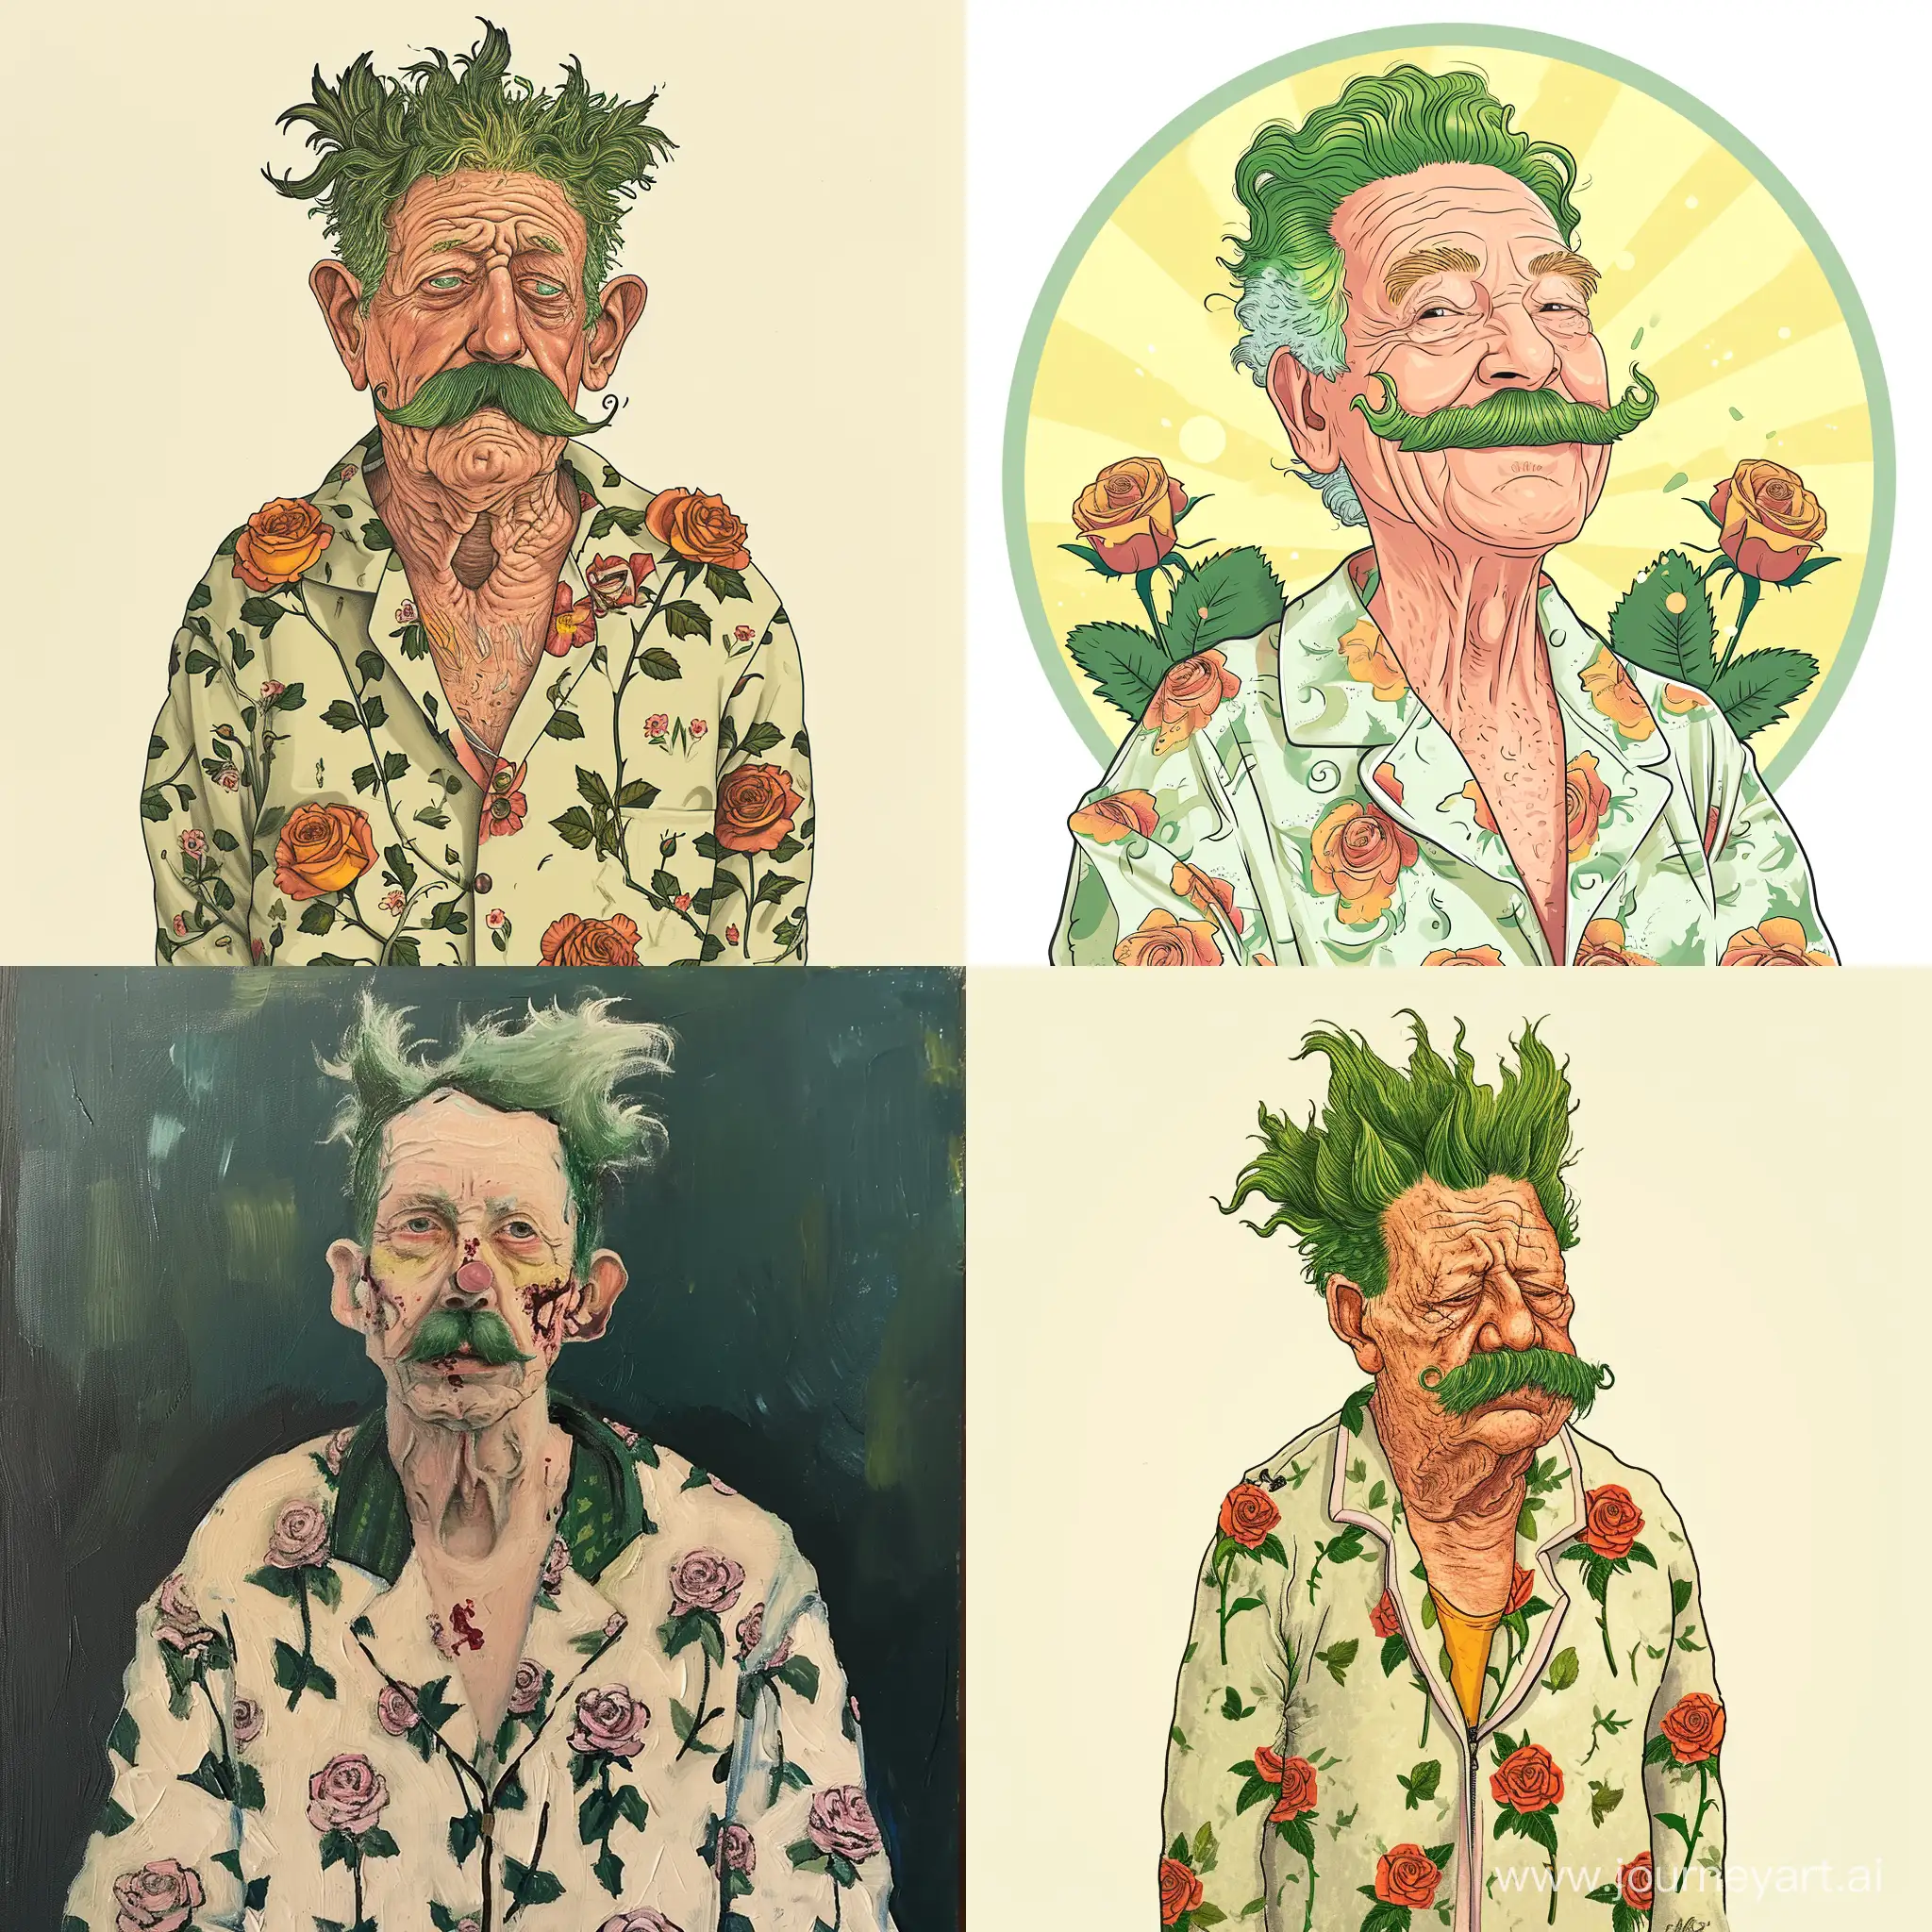 Cheerful-Grandpa-with-Green-Hair-and-Mustache-in-Rose-Pajamas